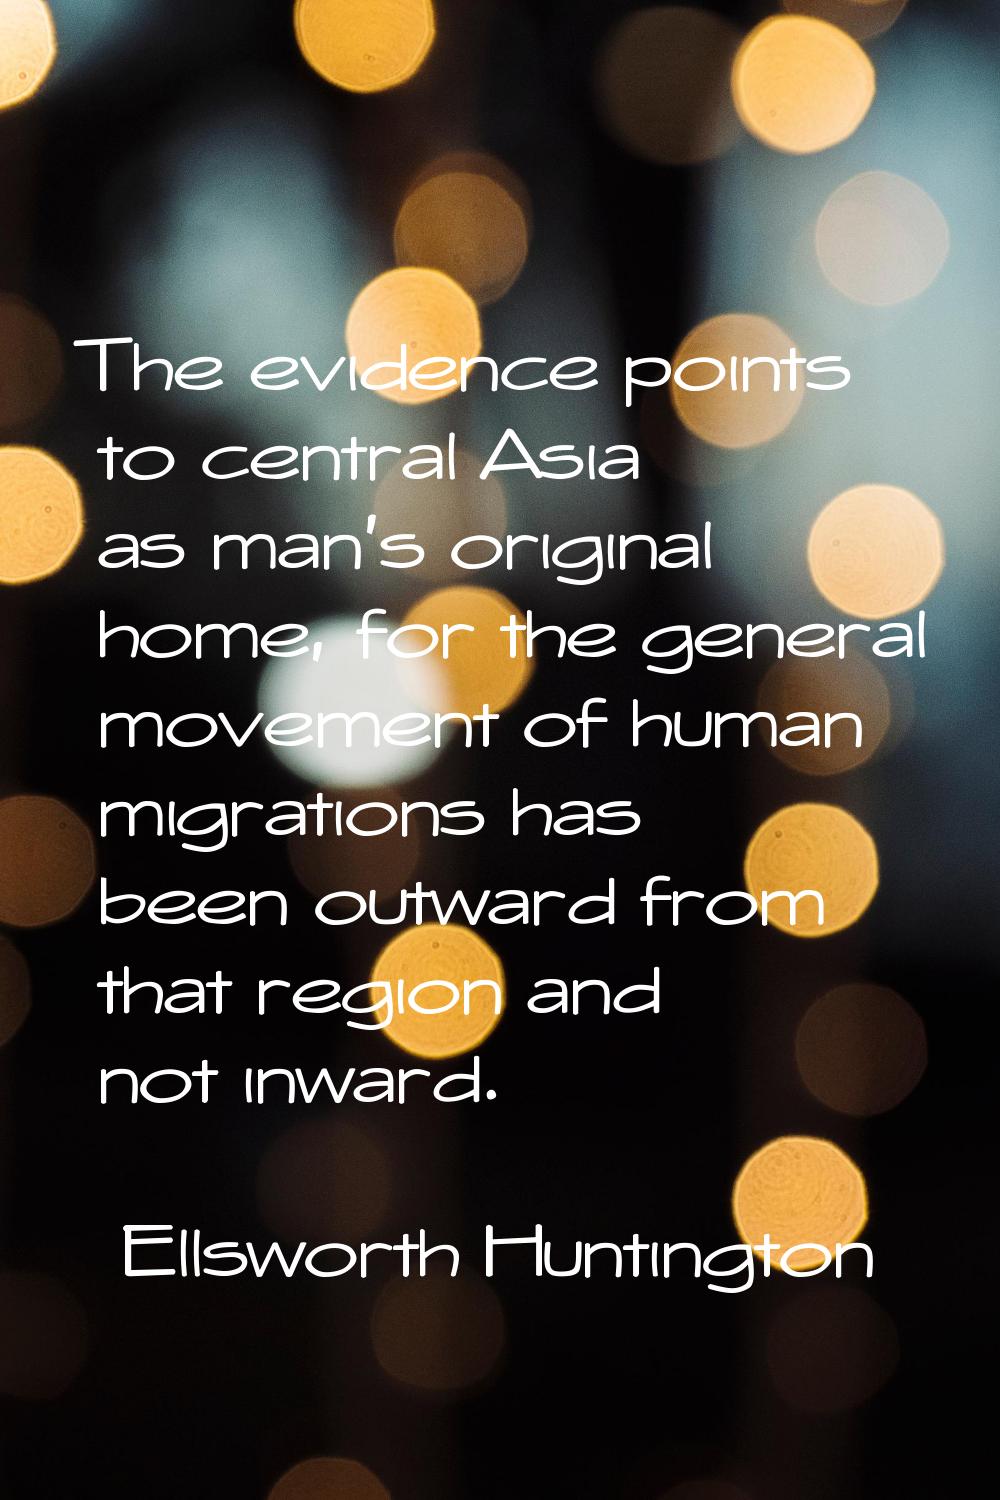 The evidence points to central Asia as man's original home, for the general movement of human migra